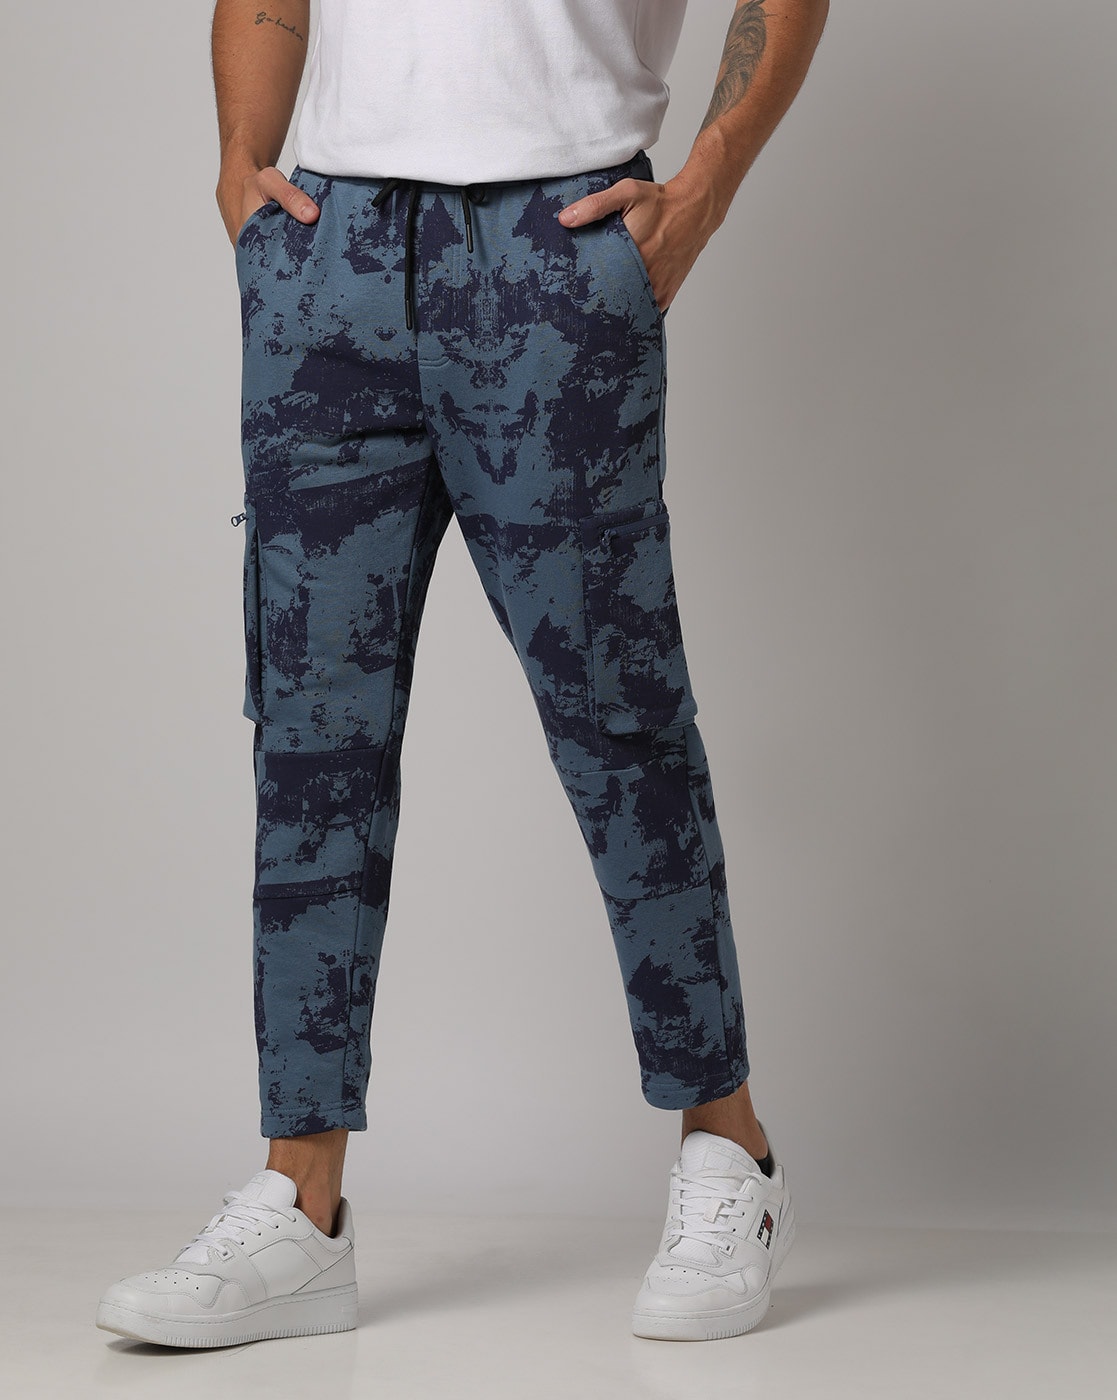 Night Urban Camouflage Trousers | Army & Navy Stores UK